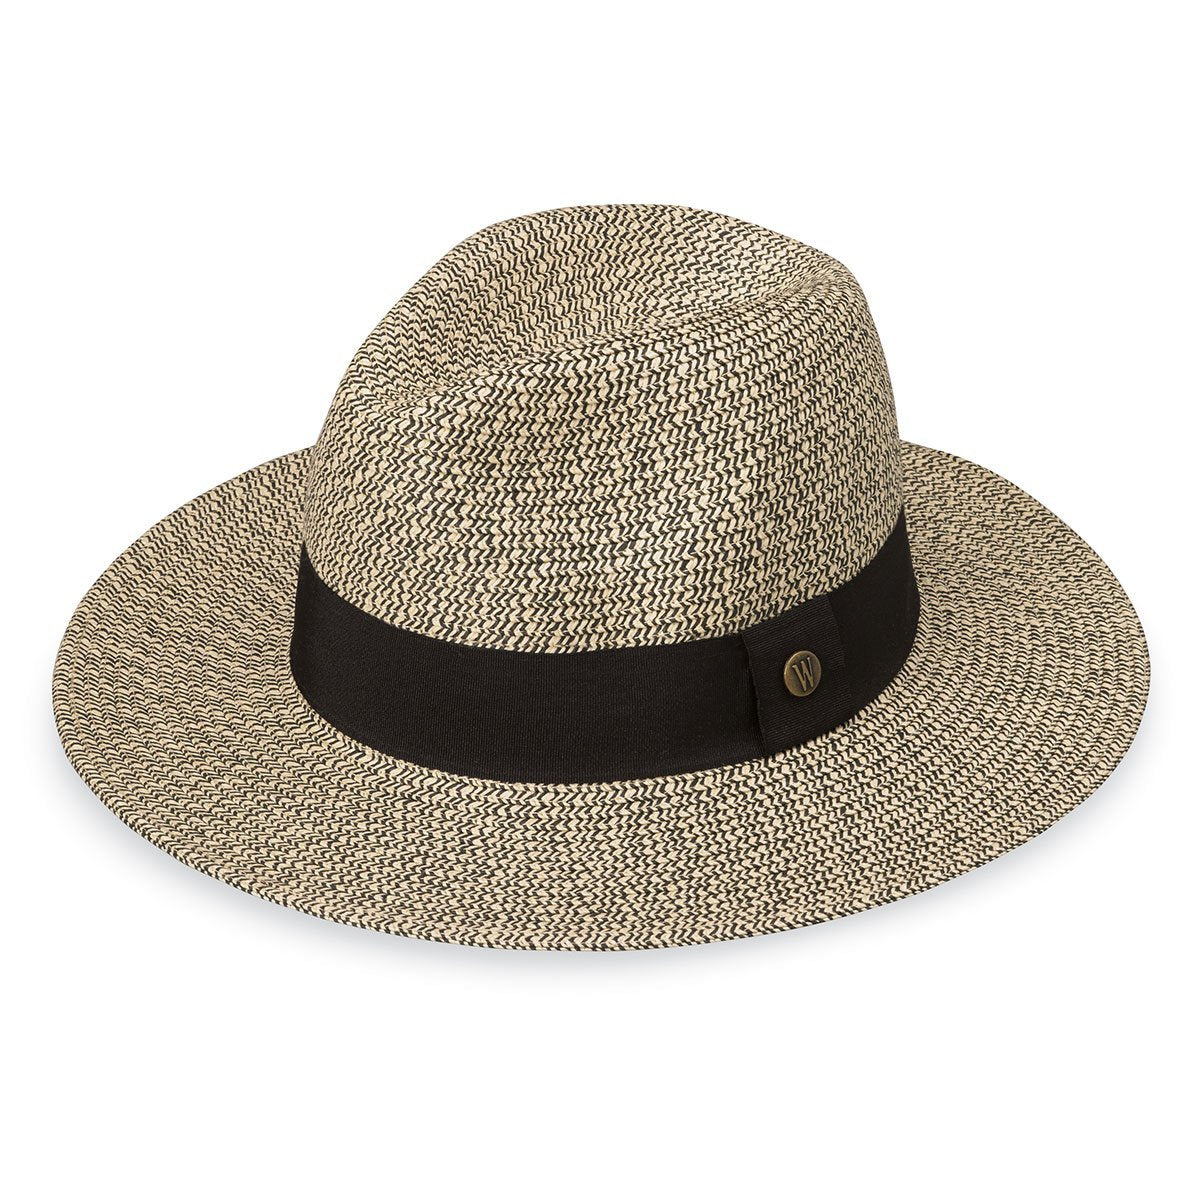 Featuring Women's Packable Josie Fedora Style Paper Braid UPF Sun Hat in Mixed Black from Wallaroo